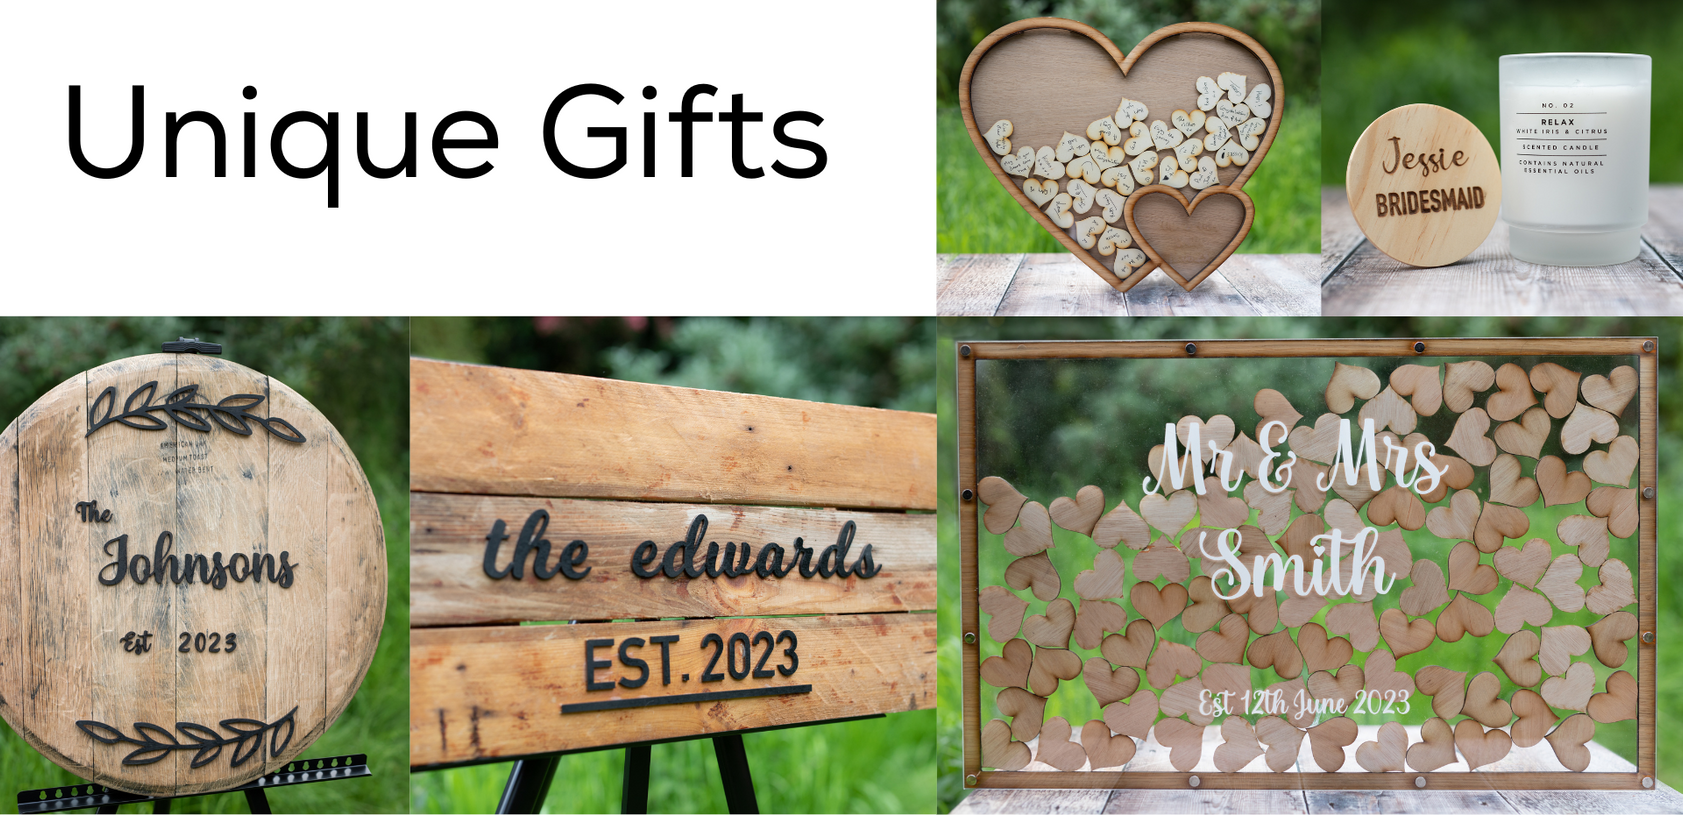 Elegant and modern Wooden Wedding Signage, Decorations, and Custom Engraved Gifts